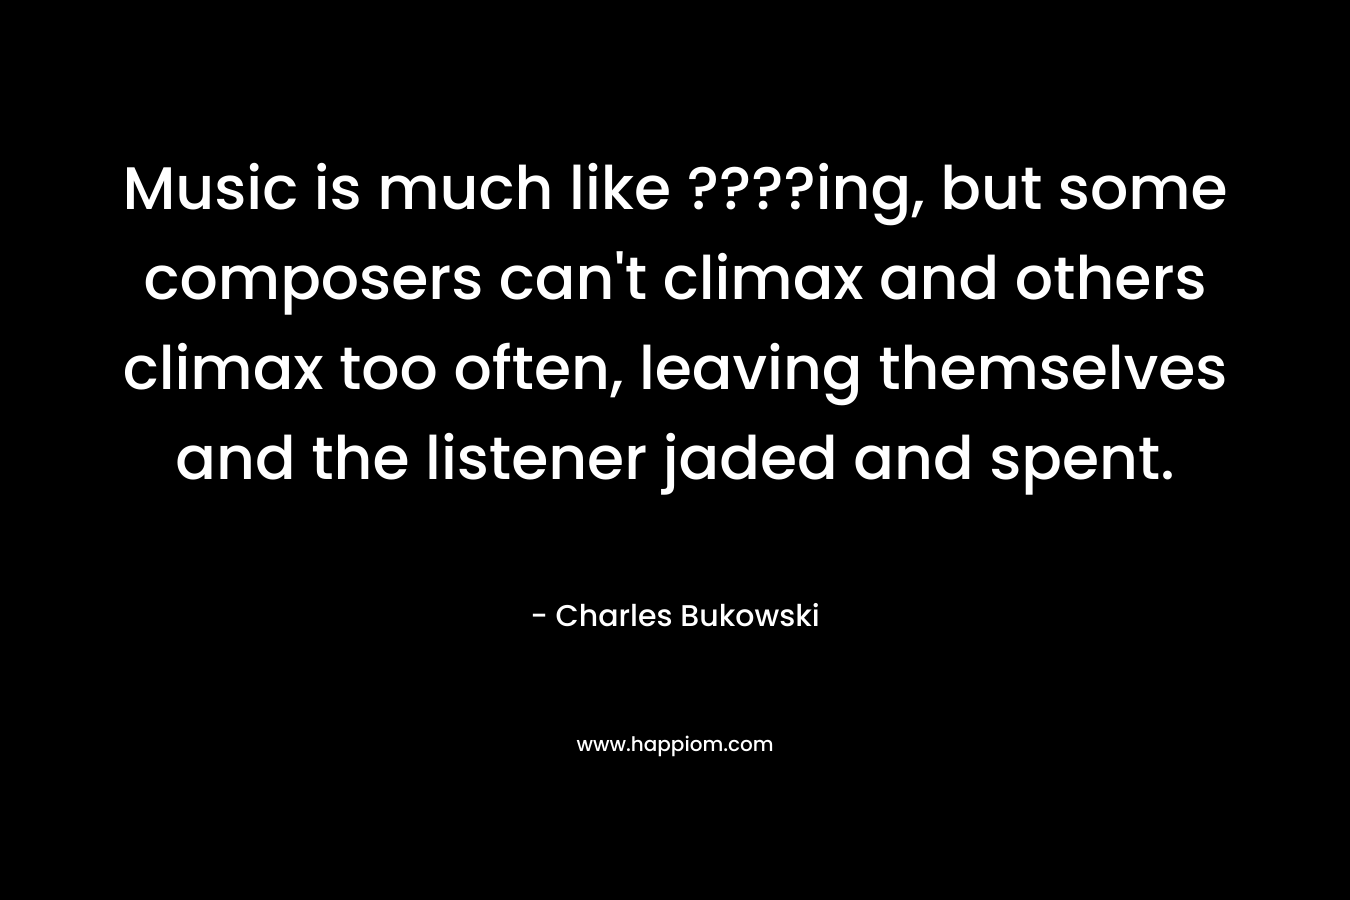 Music is much like ????ing, but some composers can't climax and others climax too often, leaving themselves and the listener jaded and spent.